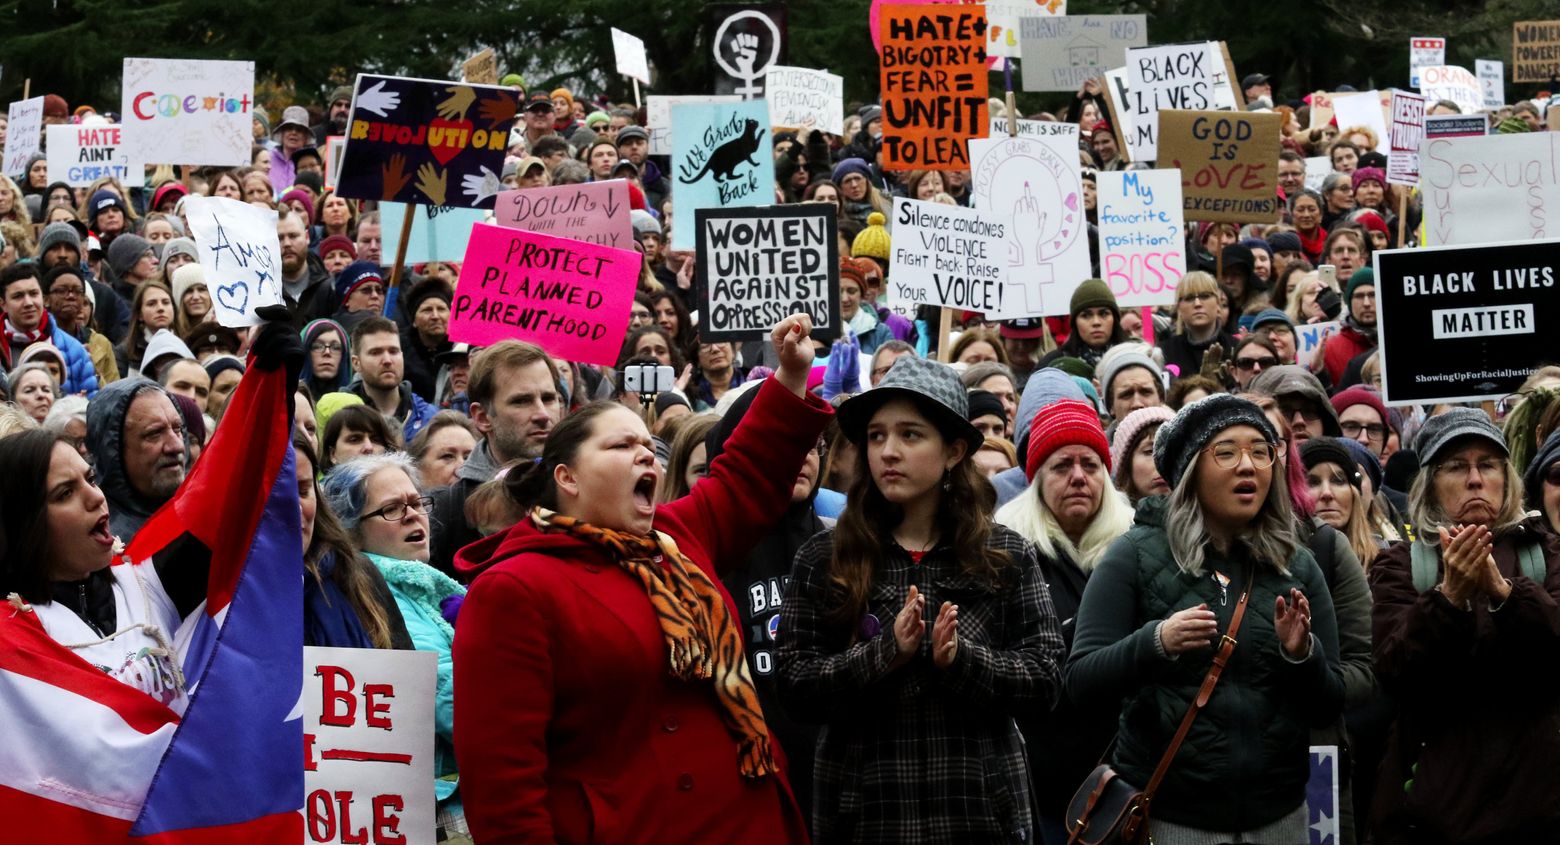 Seattle women (and others) march against hate